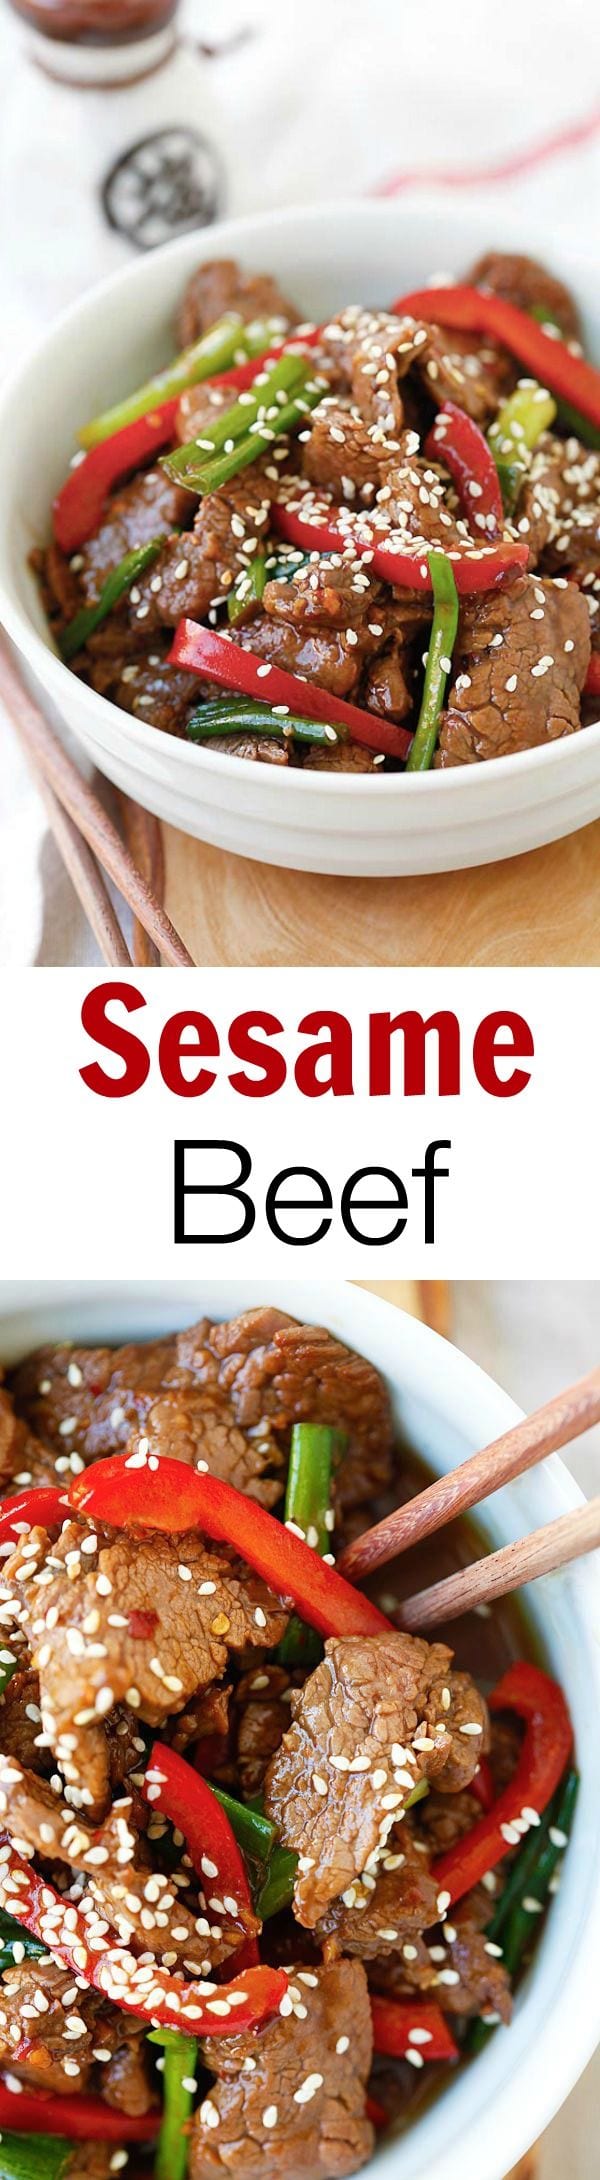 Sesame Beef – the easiest and crazy delicious beef stir-fry. Tender and juicy with a killer soy sesame brown sugar sauce. So good you’ll want seconds | rasamalaysia.com